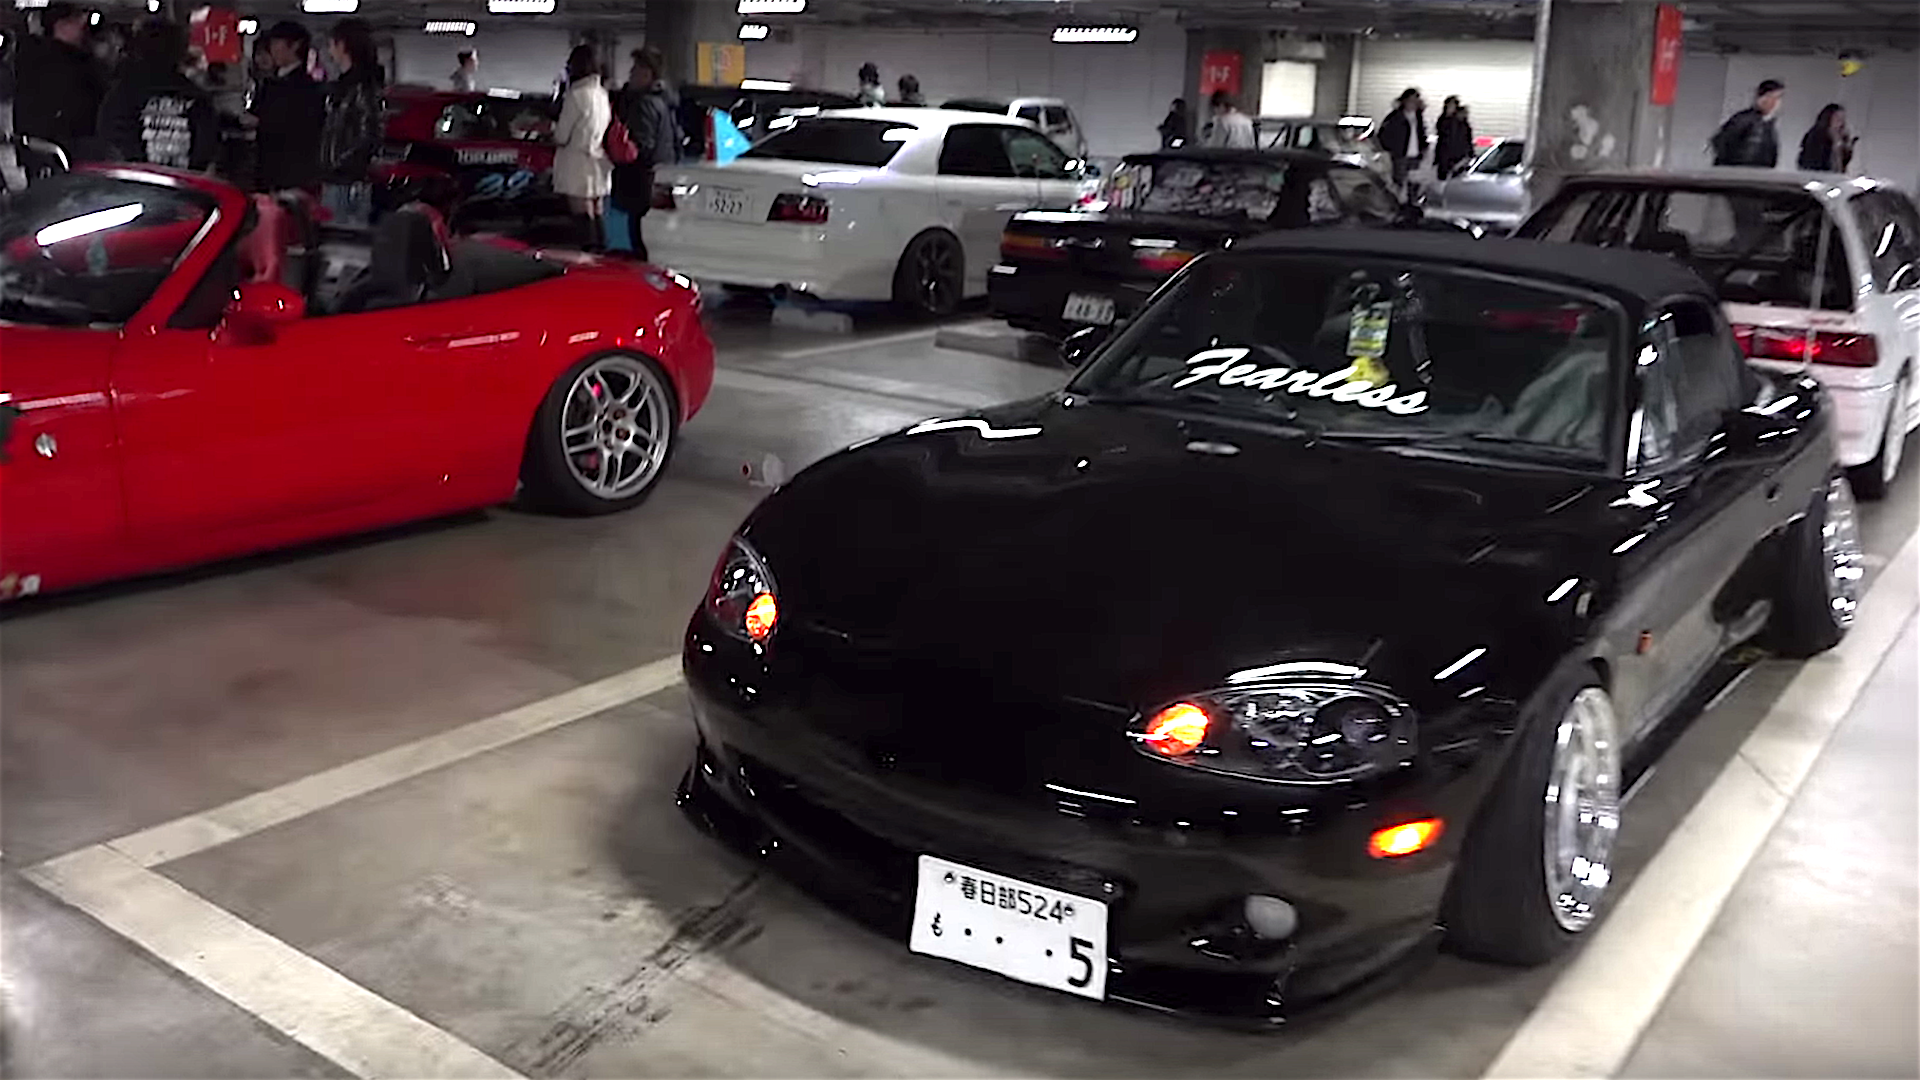 Let This Tokyo Car Meet Video Fulfil All Your JDM Wants and Desires